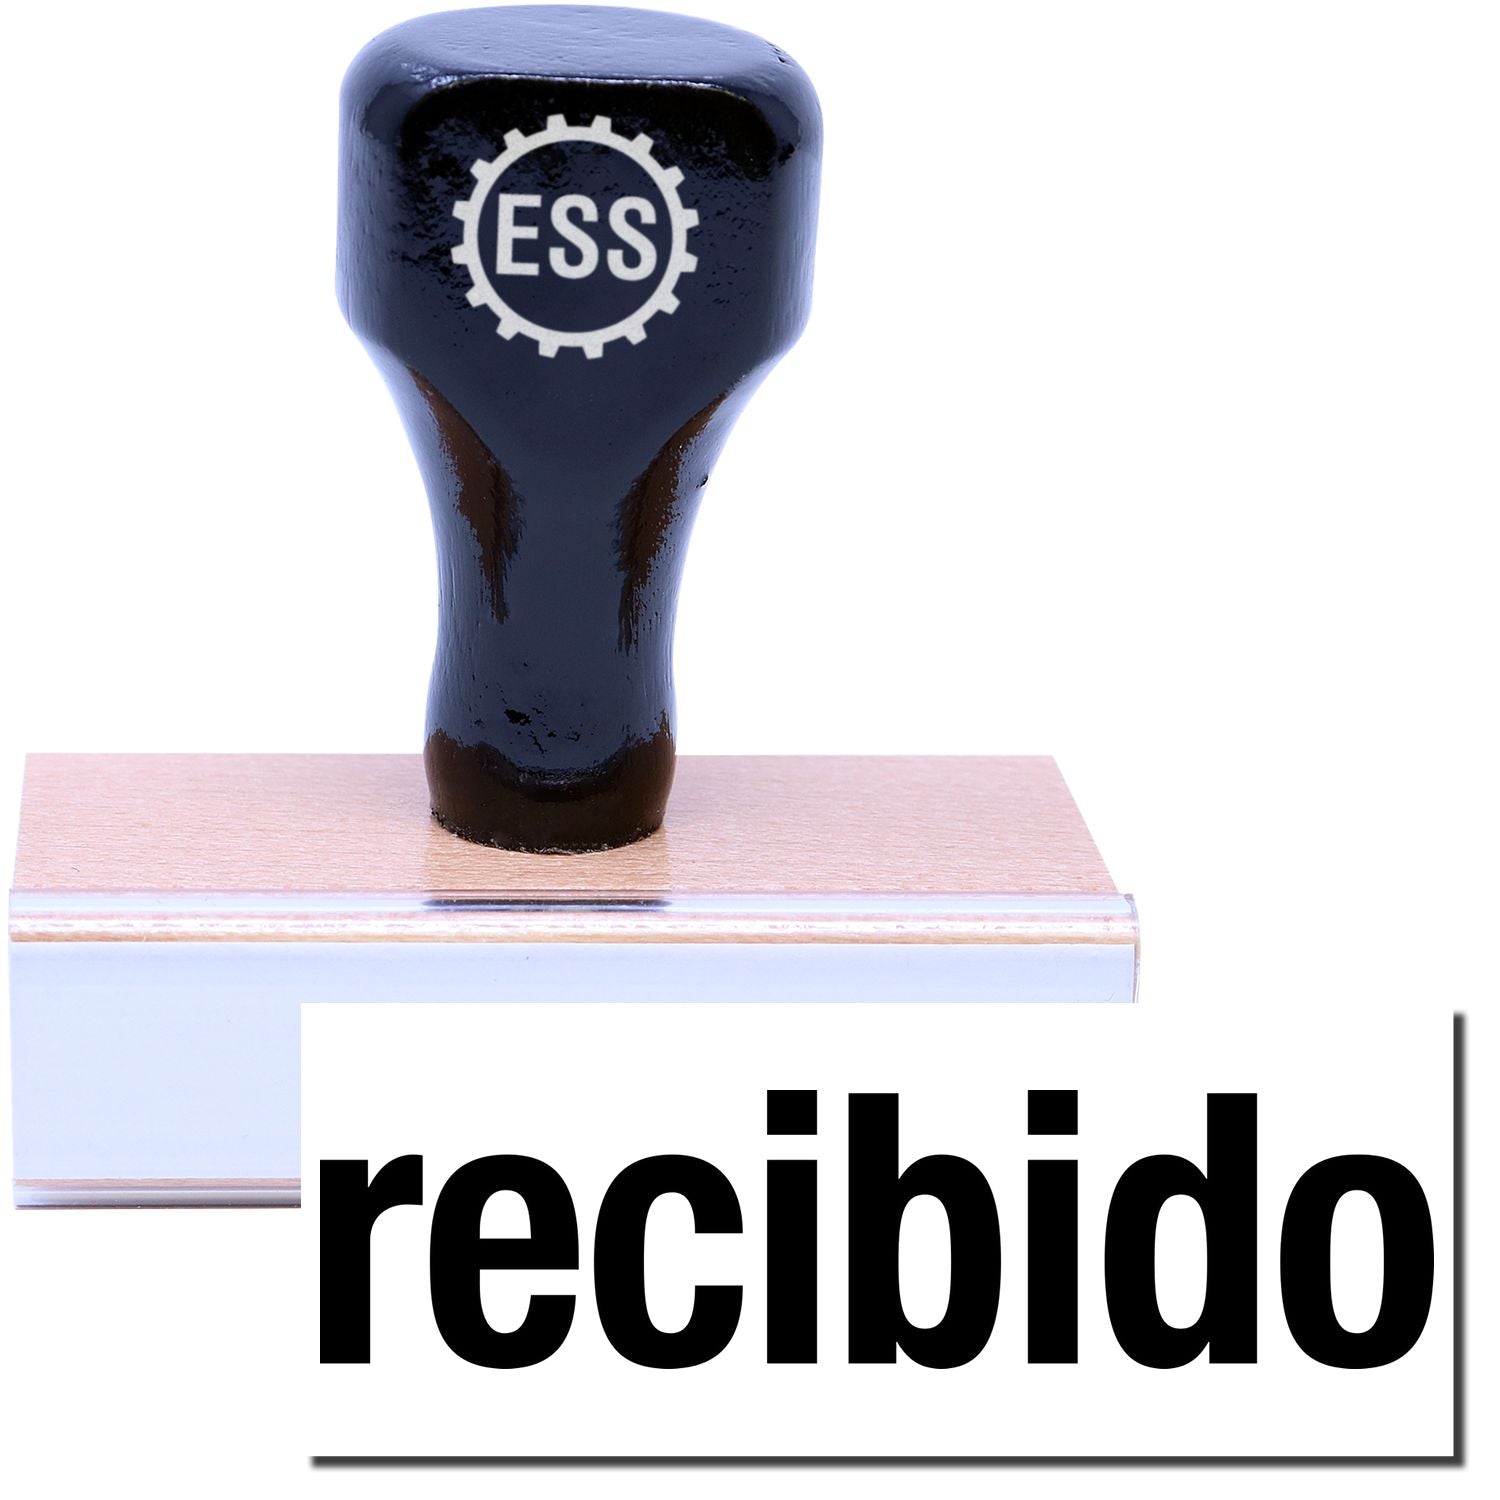 A stock office rubber stamp with a stamped image showing how the text "recibido" in bold font is displayed after stamping.